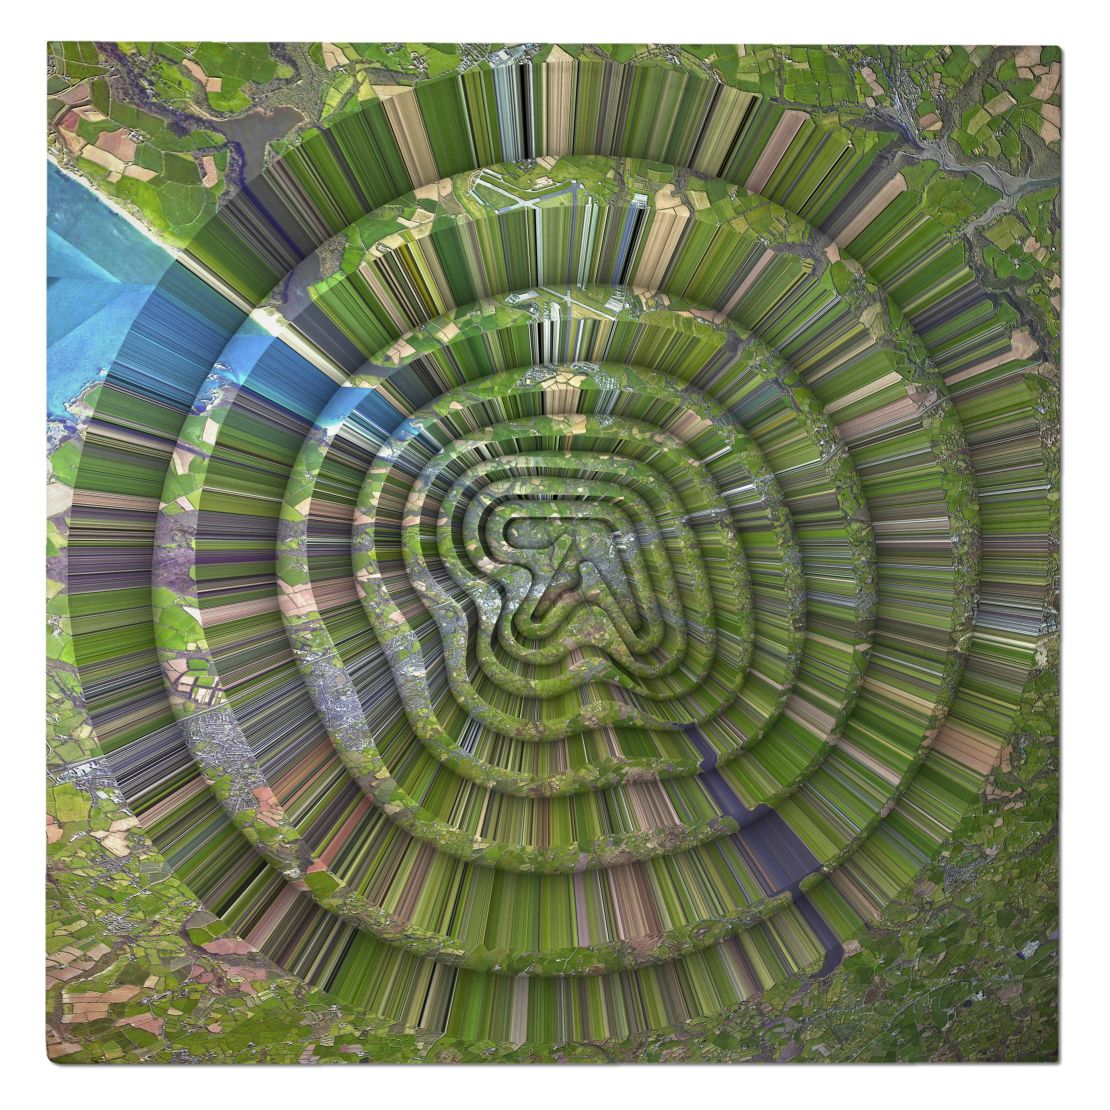 Aphex Twin's "Collapse" EP (1990) was illustrated by London-based artist Weirdcore.